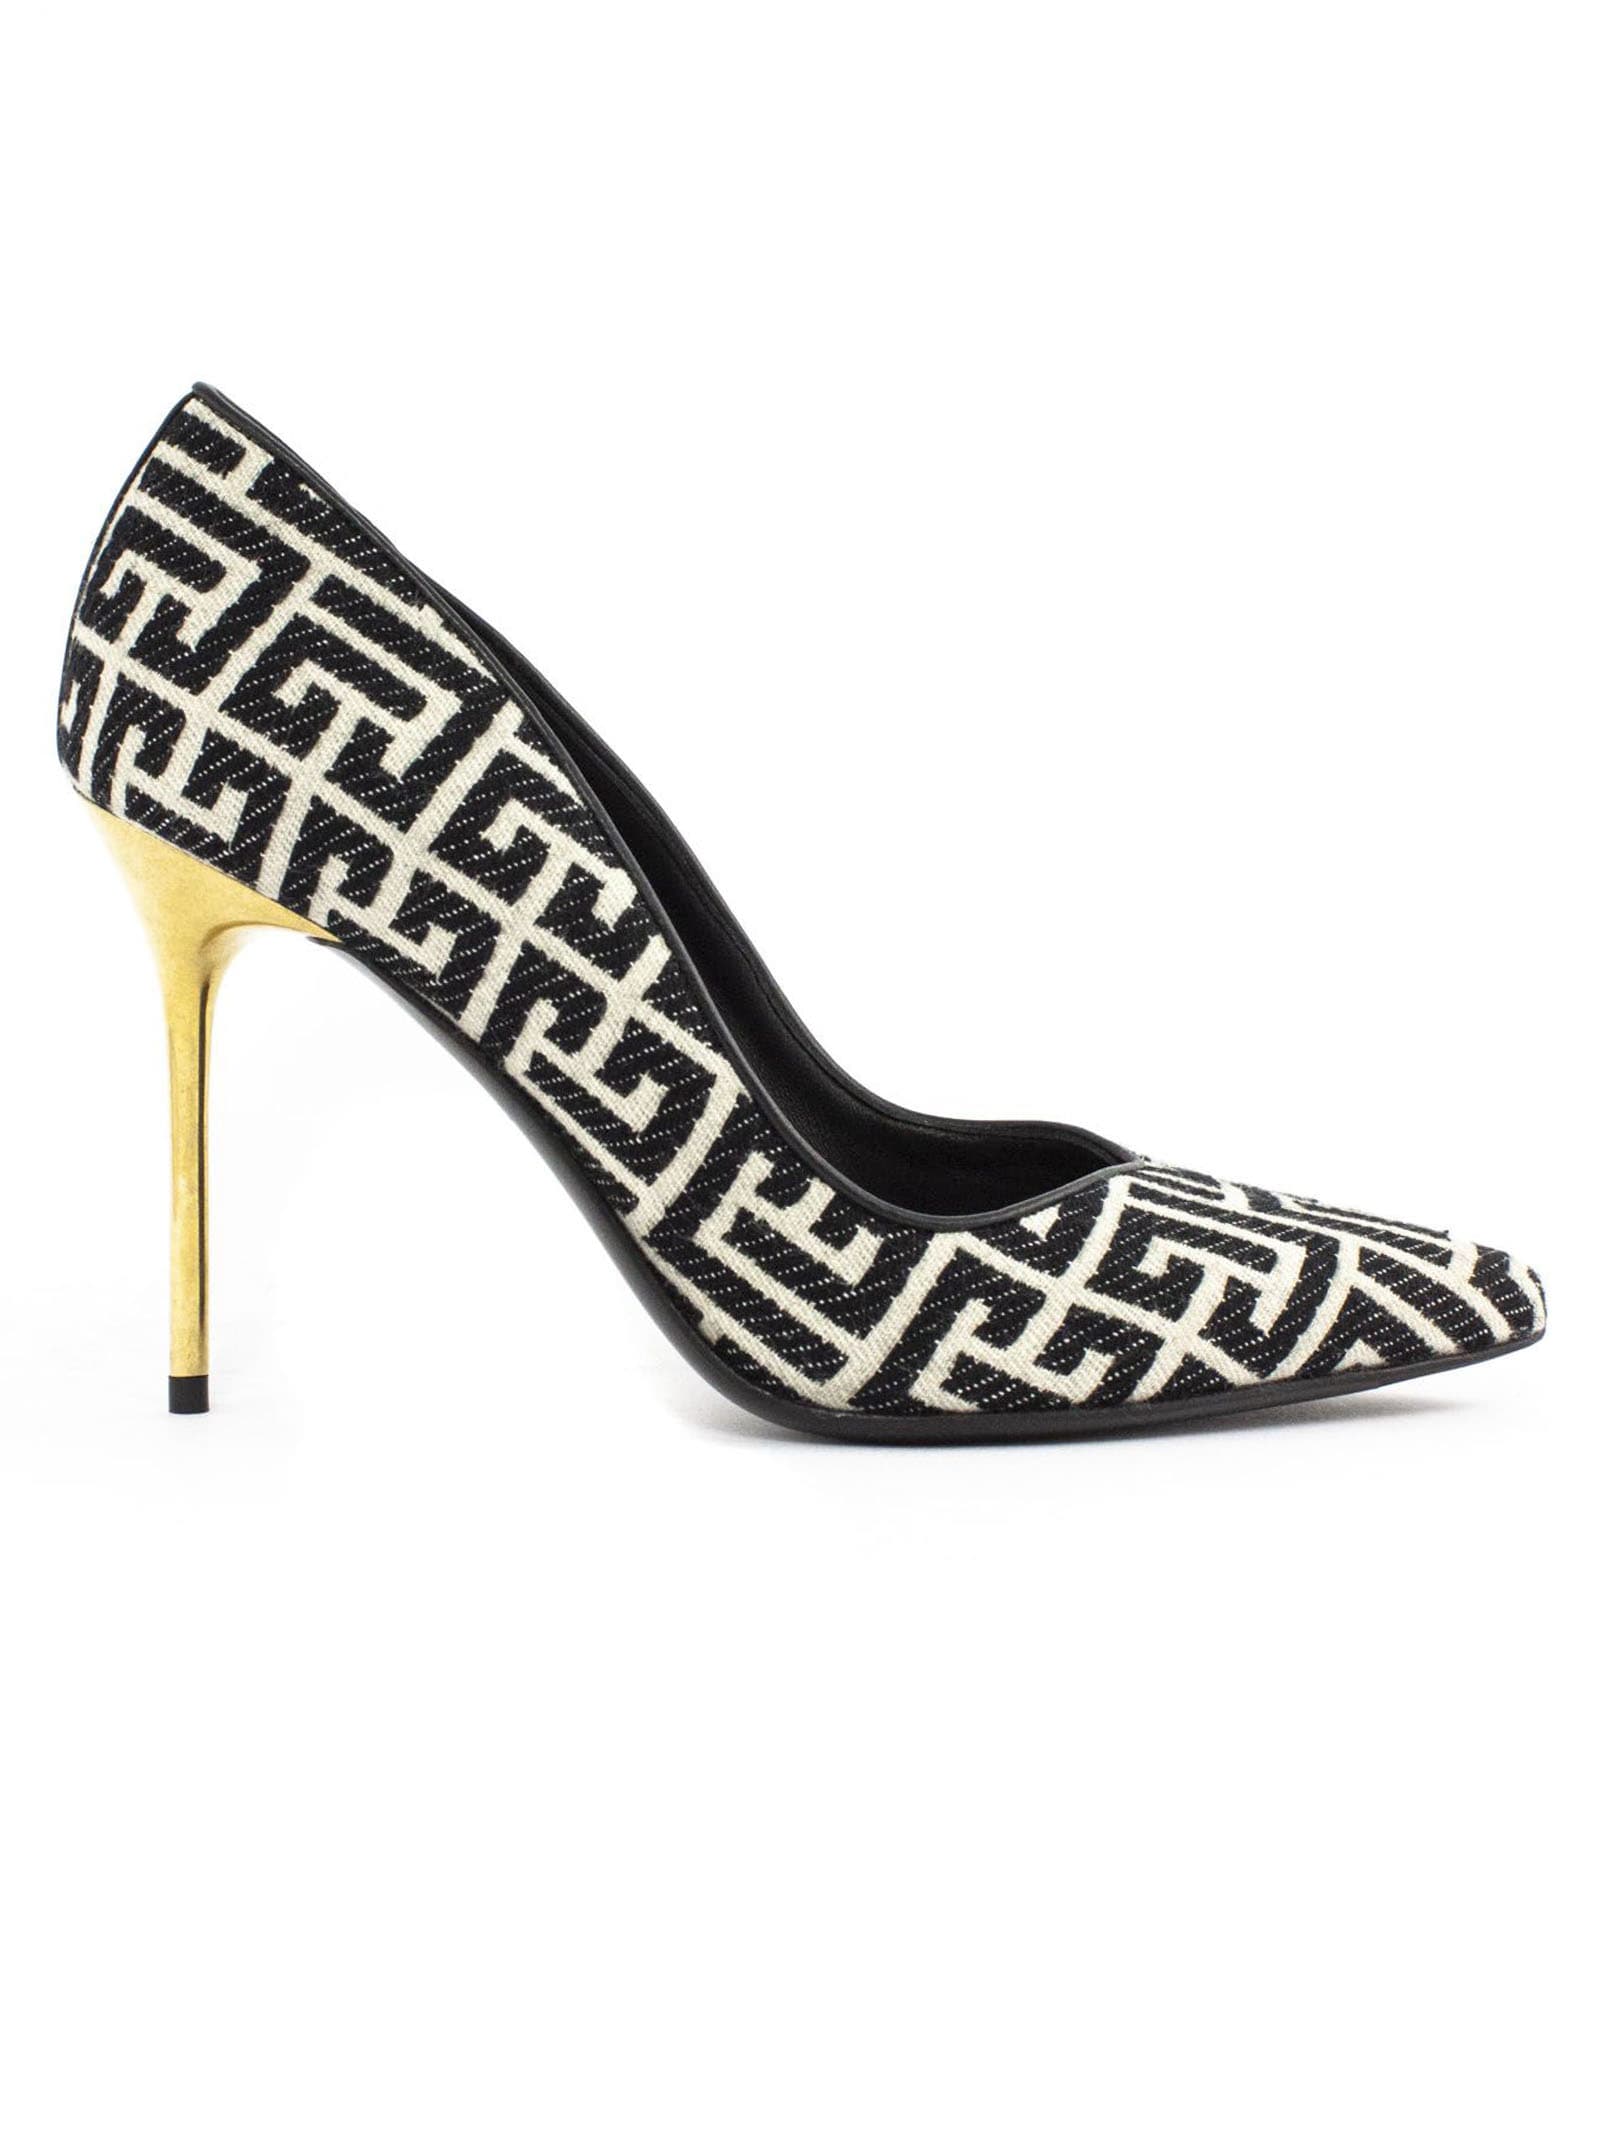 Buy Balmain Ivory And Black Ruby Pumps online, shop Balmain shoes with free shipping